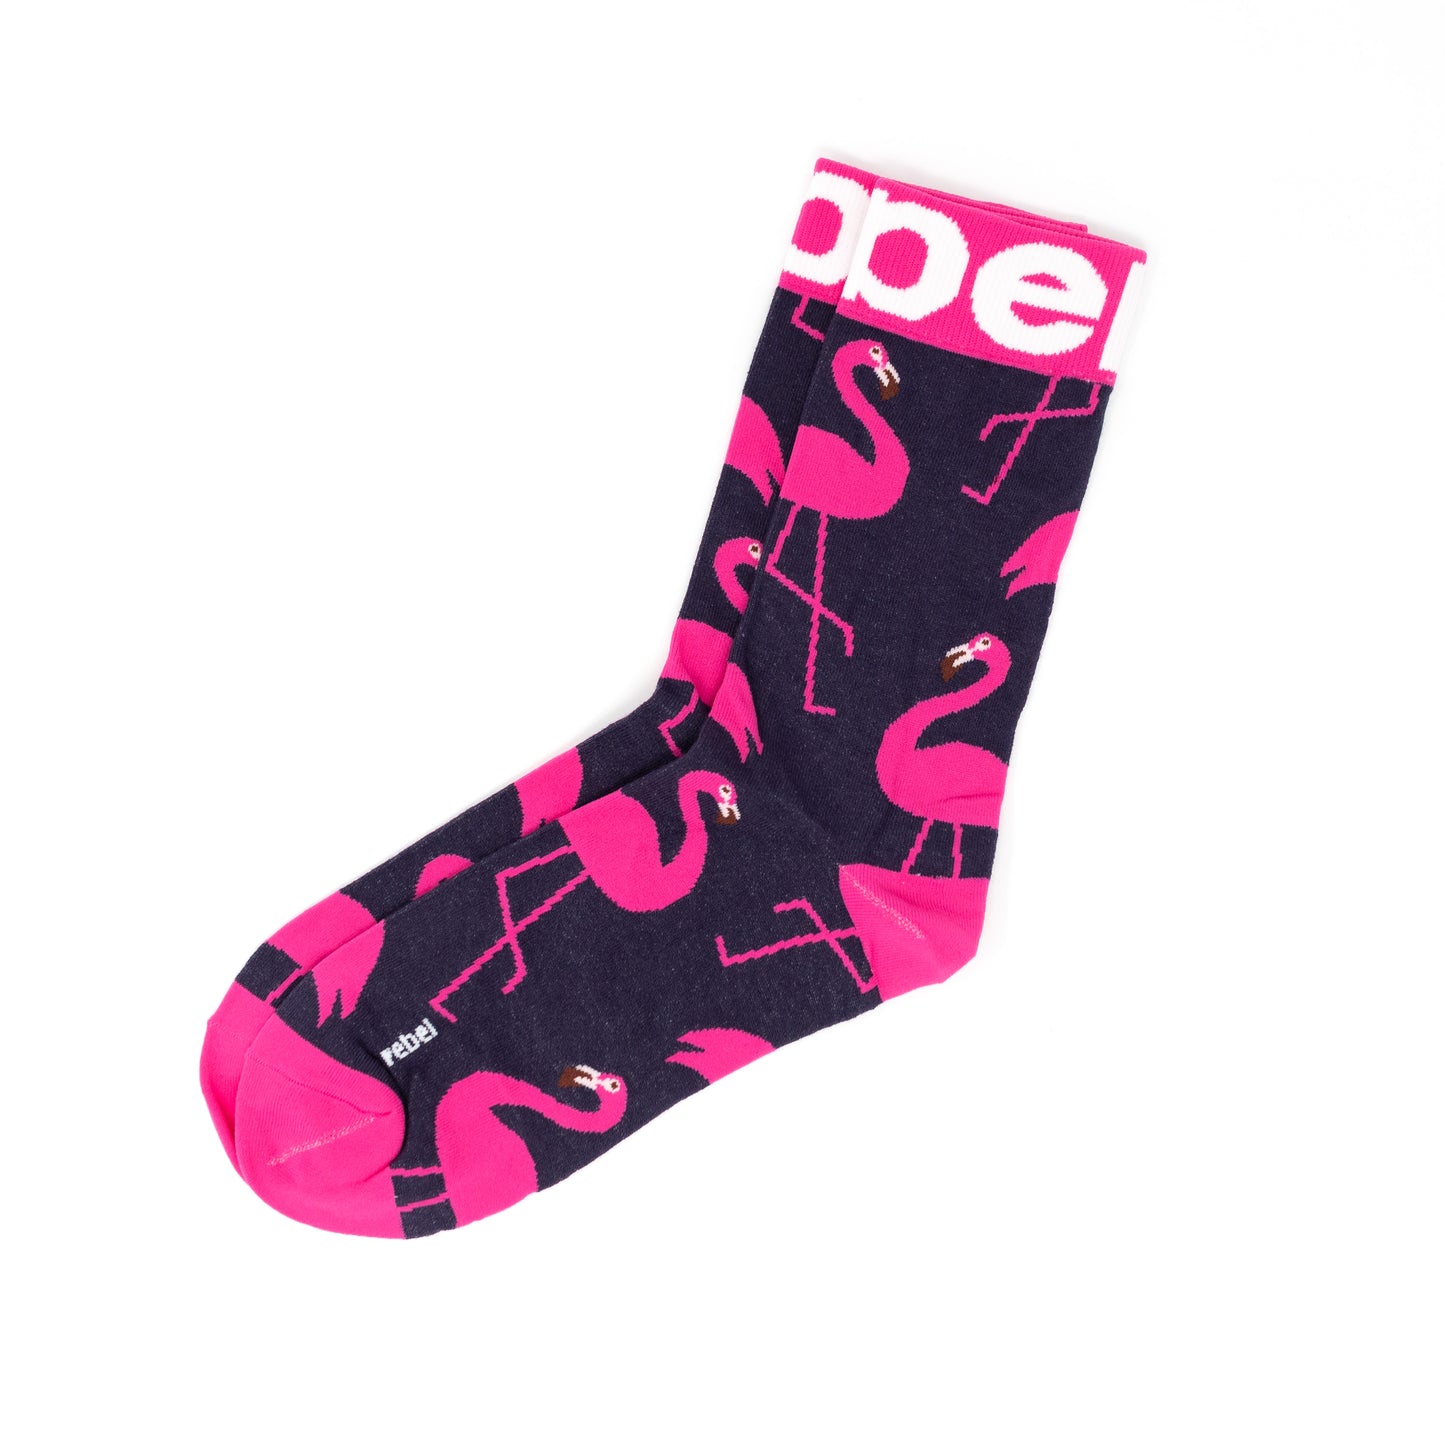 Perfect for those who love to stand out with their fashion choices, our Flamingo Socks are a must-have for any sock collection.